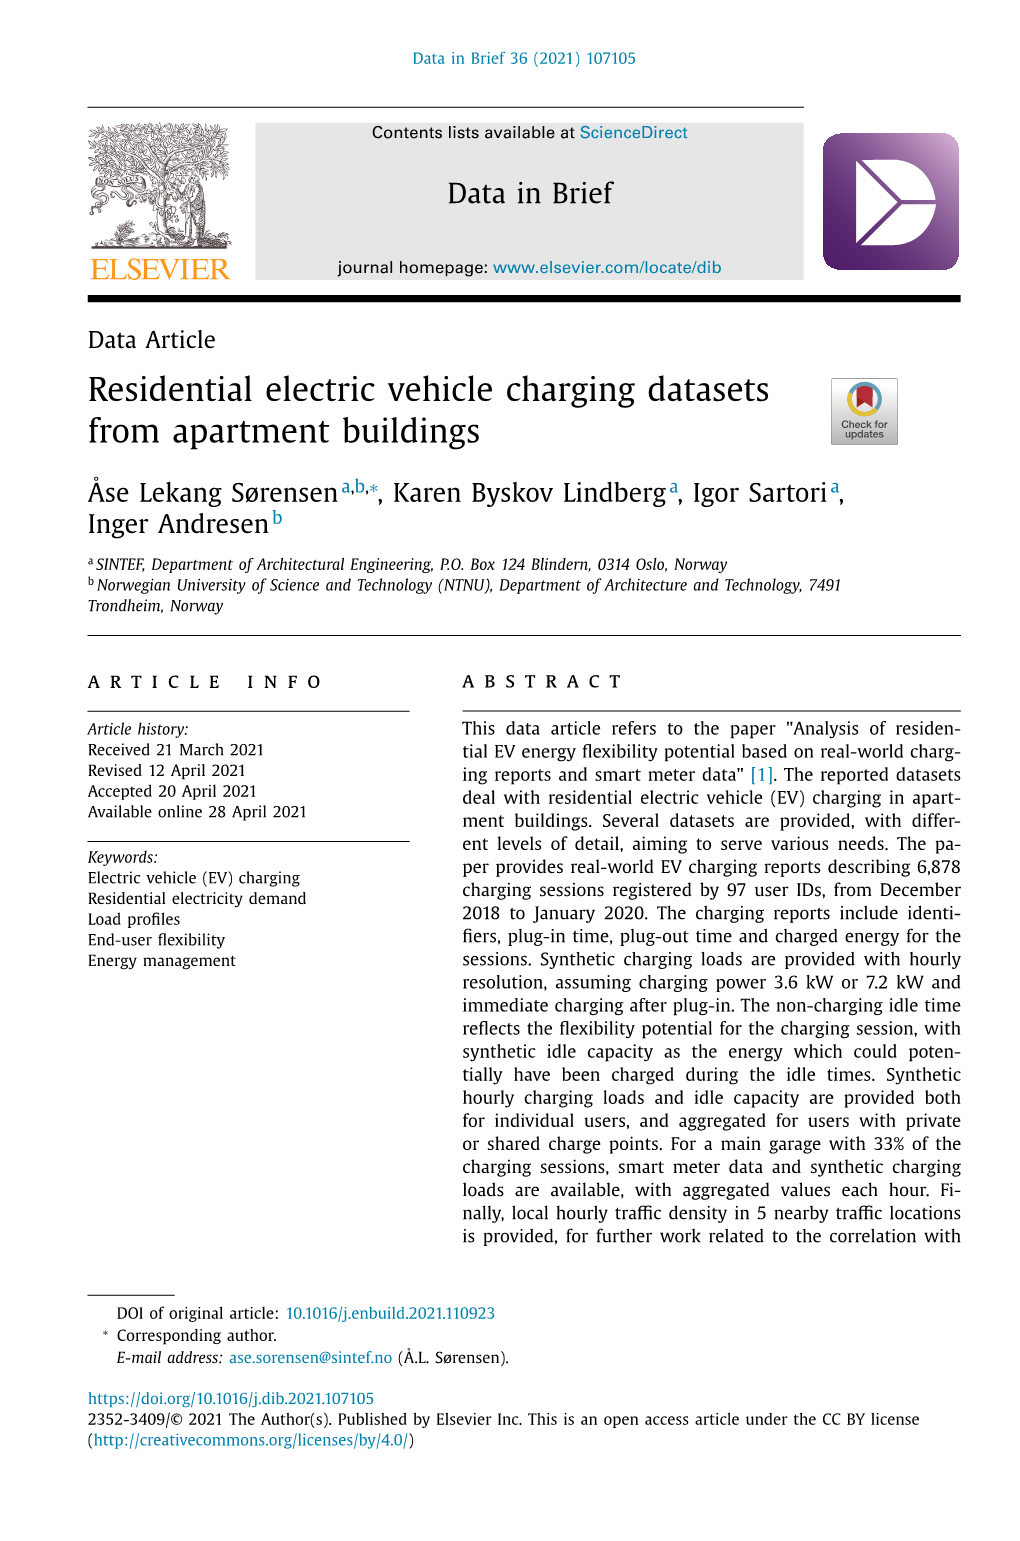 Residential Electric Vehicle Charging Datasets from Apartment Buildings